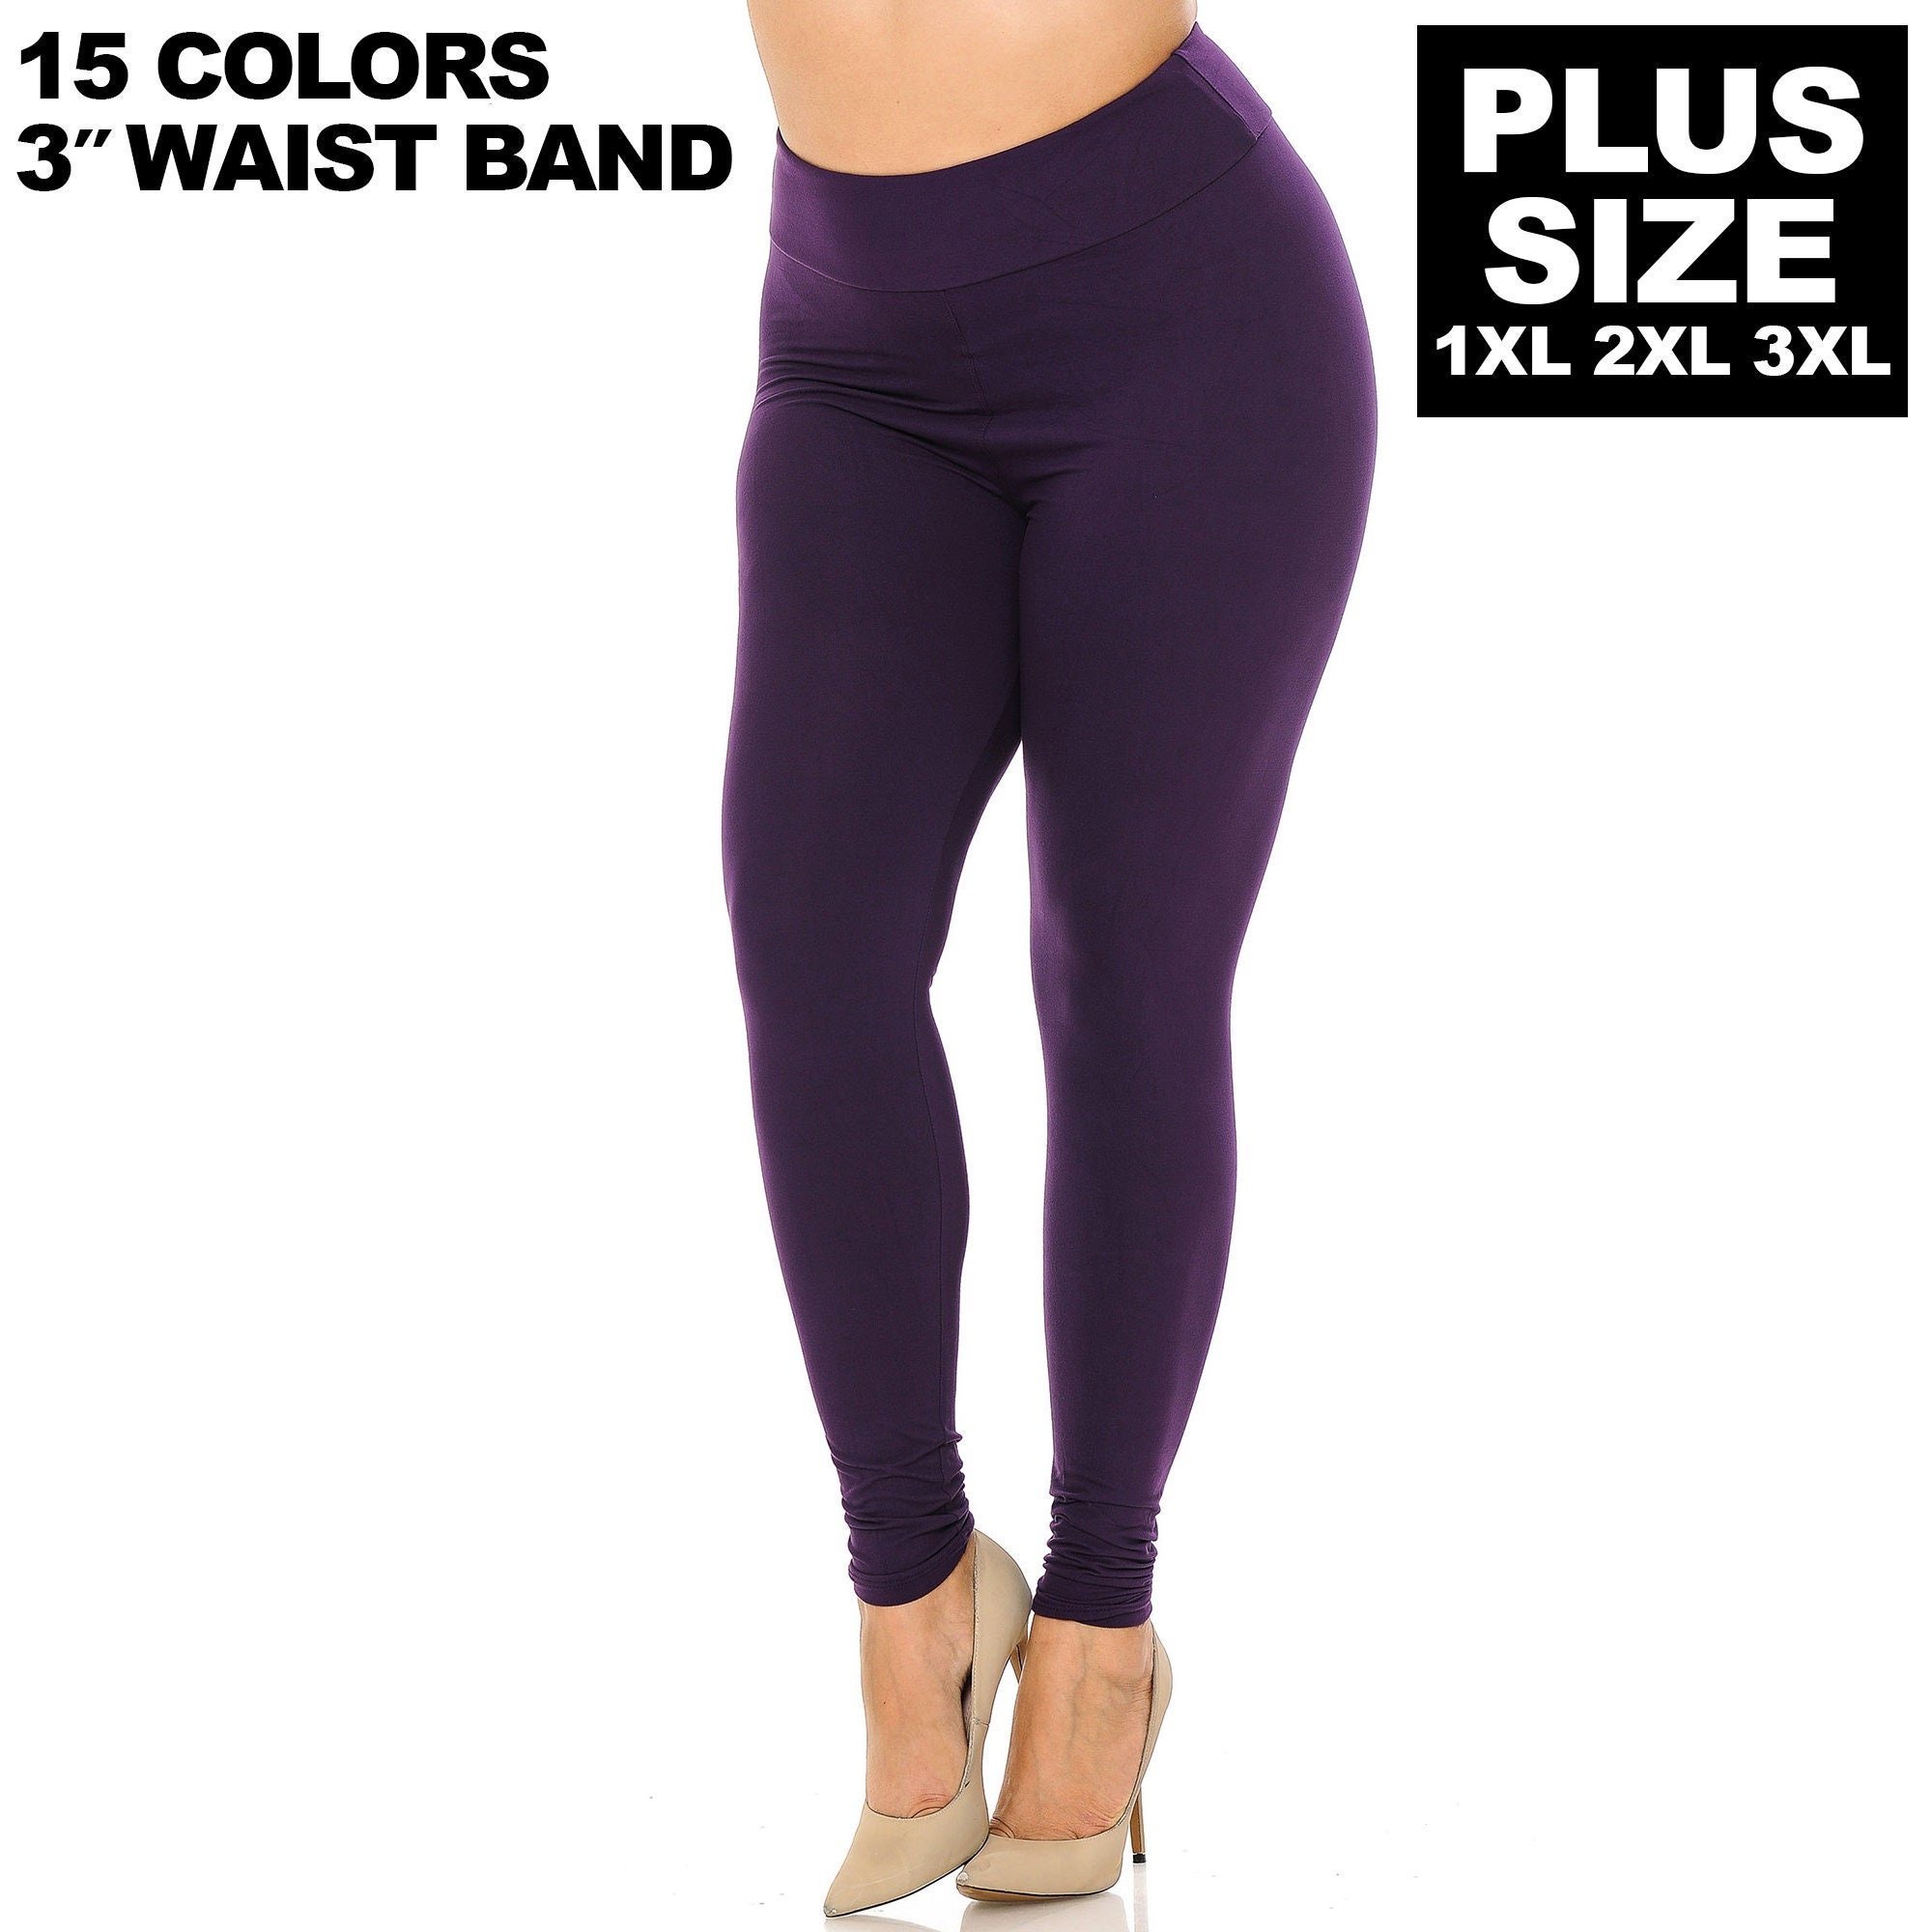 Extra Plus Size Buttery Soft Basic Solid High Waisted Leggings 3 Inch Waist  Band Fits 3XL, 4XL, 5XL, Full Length 15 Colors 